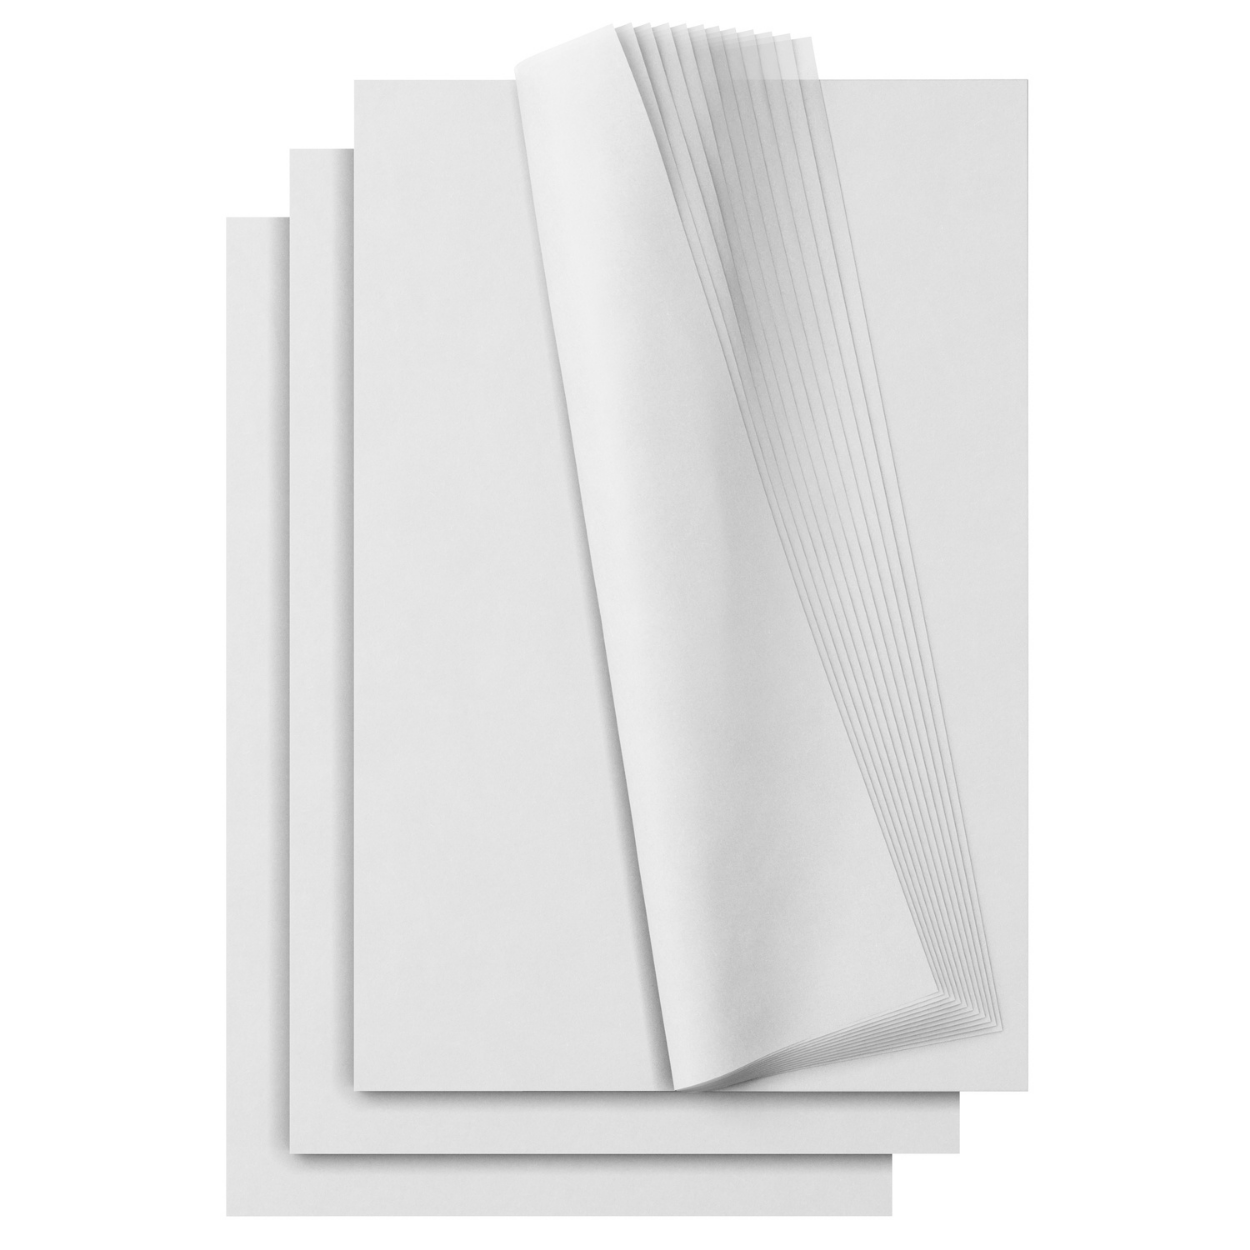 Wholesale White Tissue Paper in Bulk - 15x20 inch - 960 Sheets